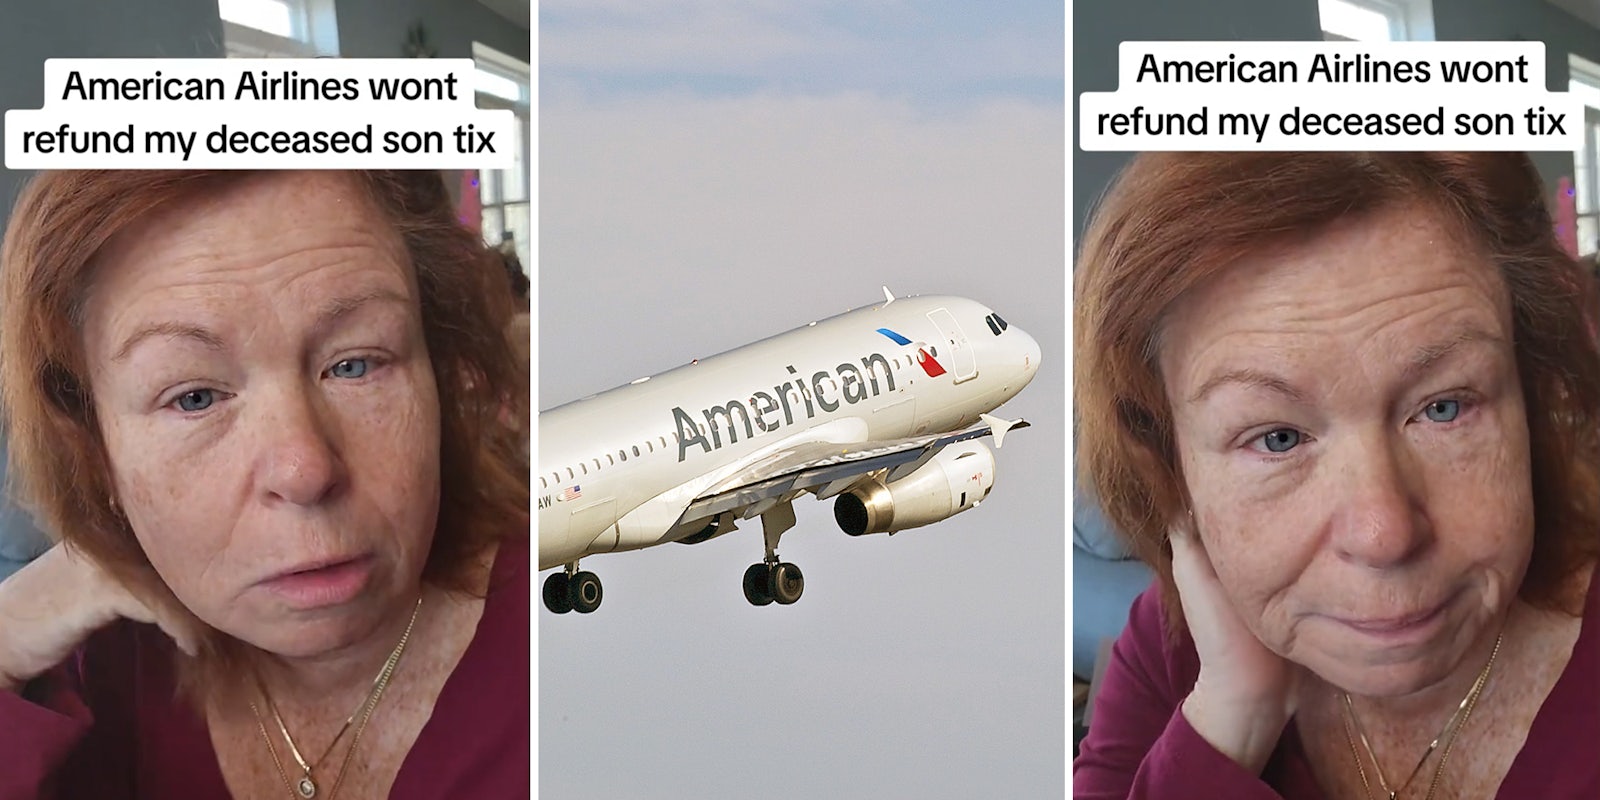 Woman says American Airlines refuses to refund her deceased son’s ticket